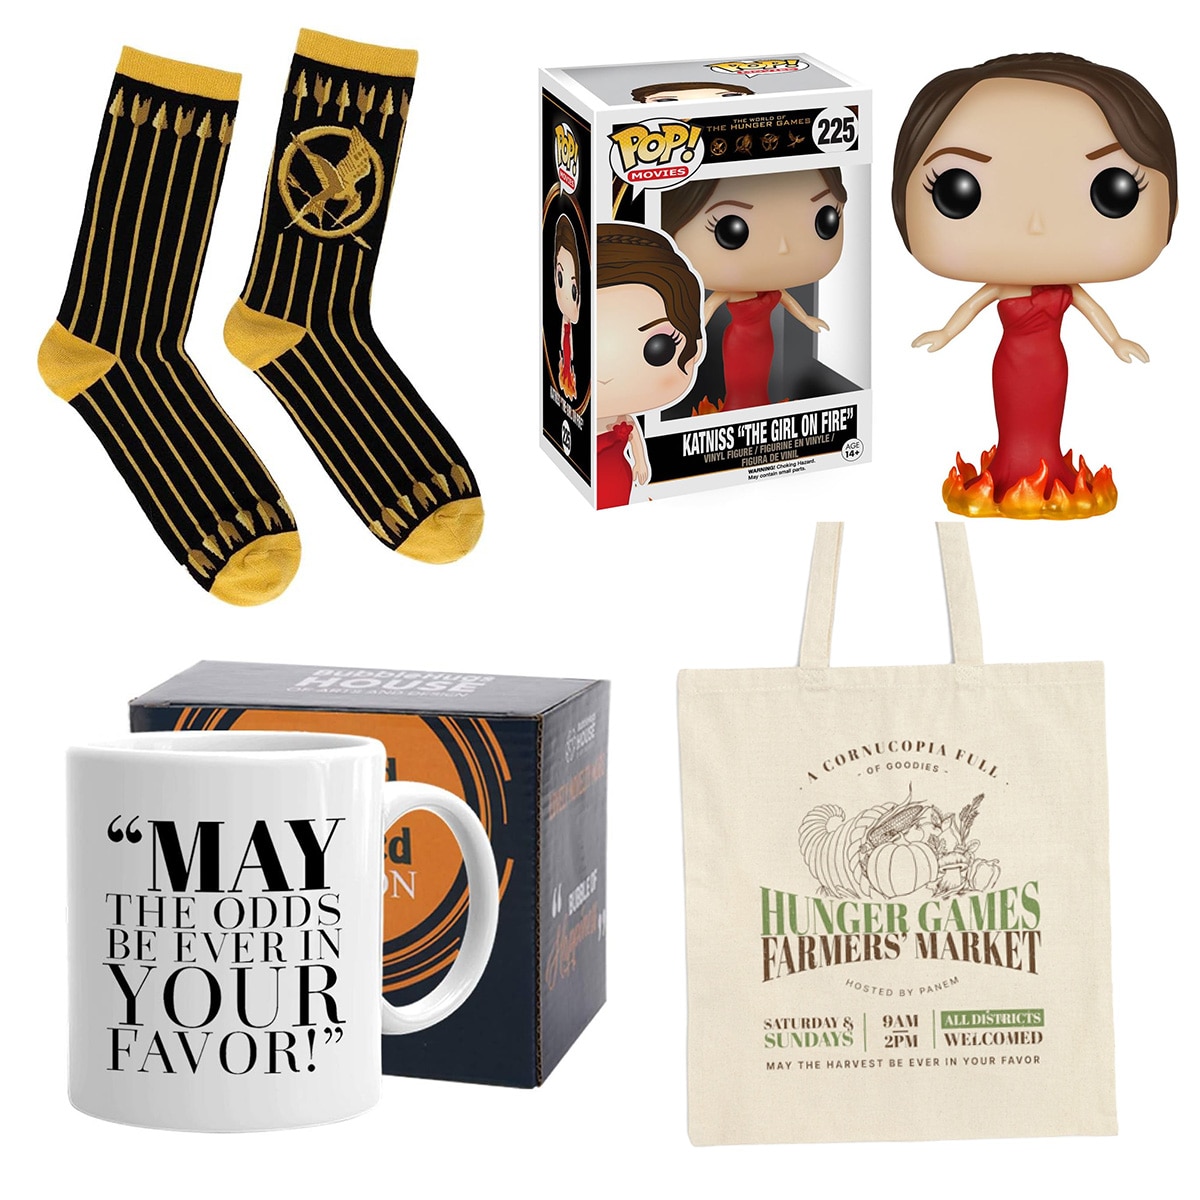 Ecomm: The Hunger Games Gift Guide